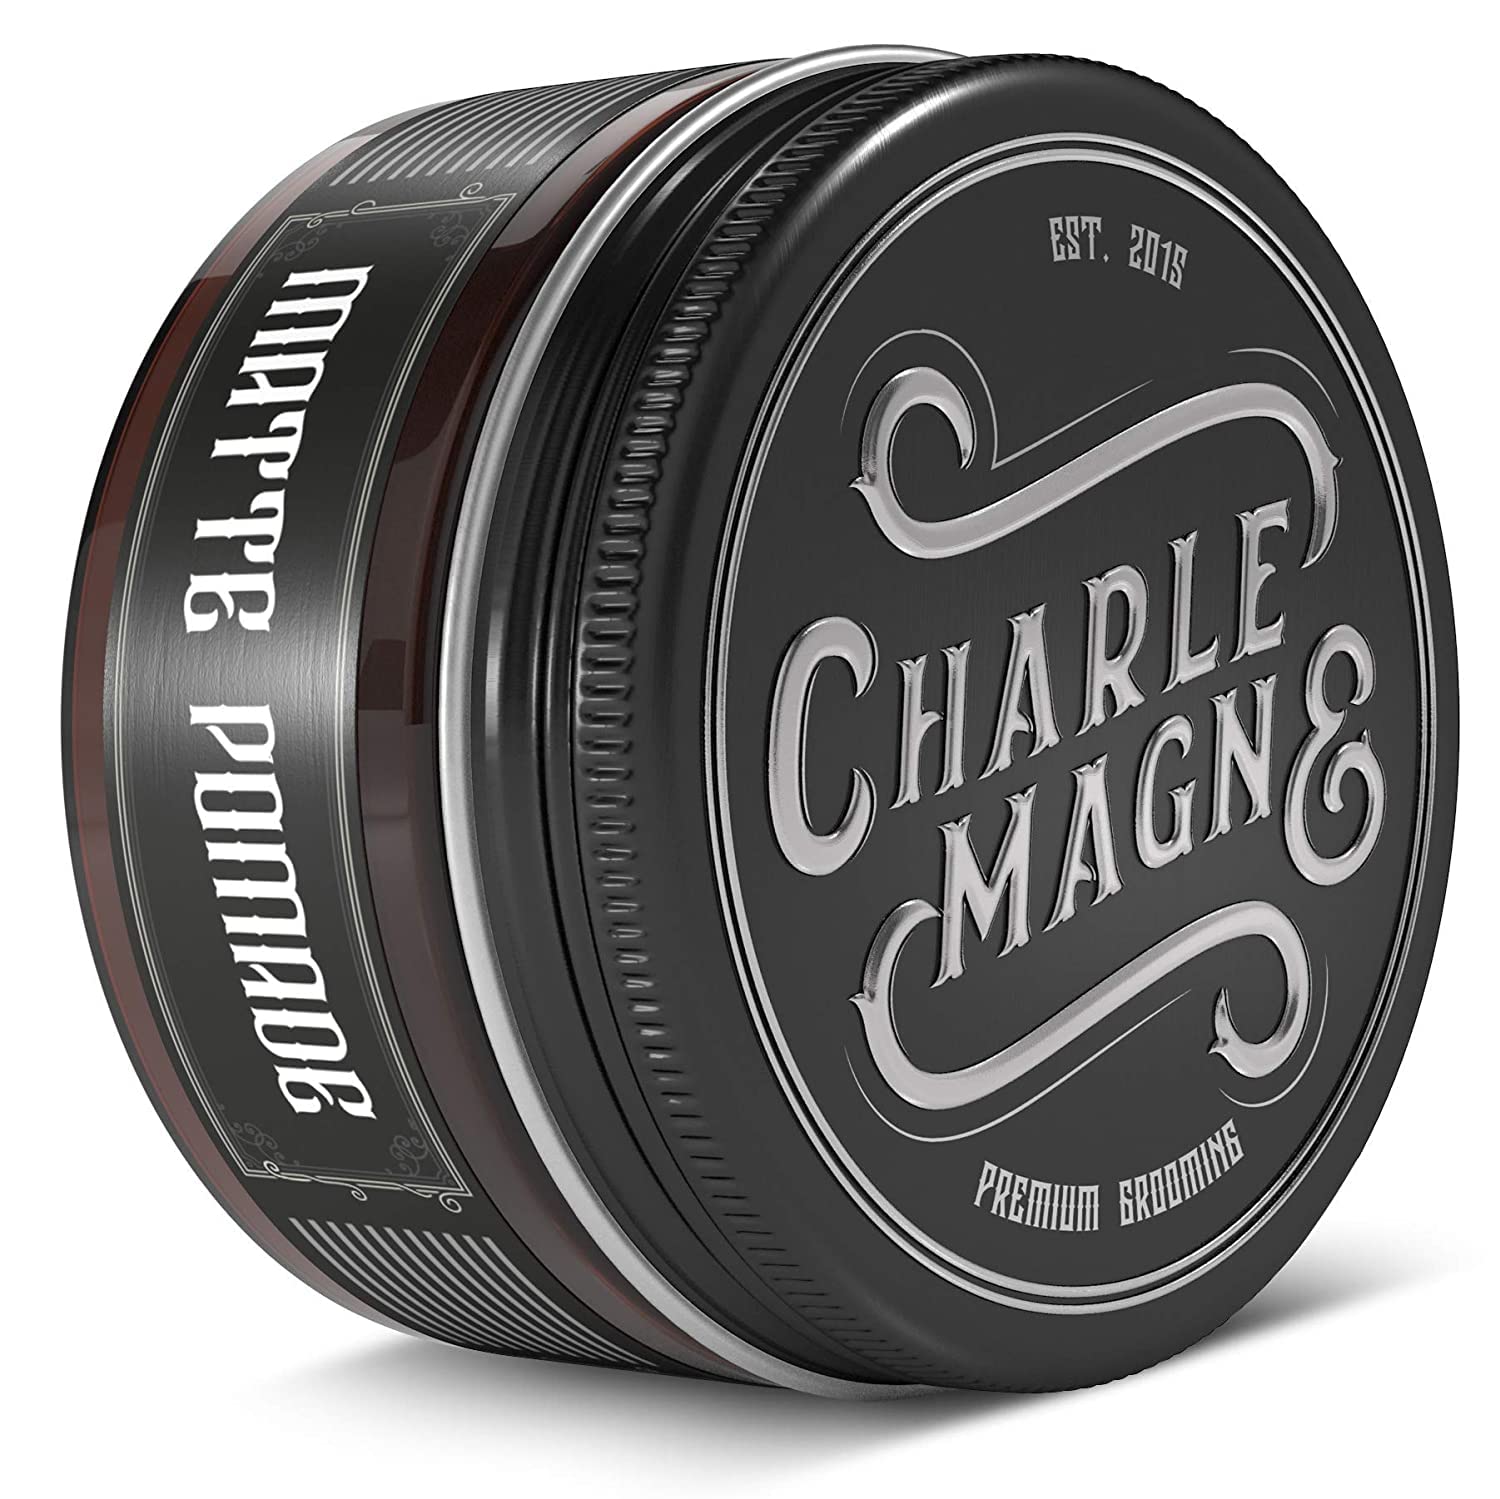 Charlemagne Matte Pomade Water-Based Set of 2 - Strong Hold - Best Hair Wax Matt Short or Long Hair - Hair Wax Men Hair Wax Men Hair Wax Men Hair Wax Men Hair Paste Wax